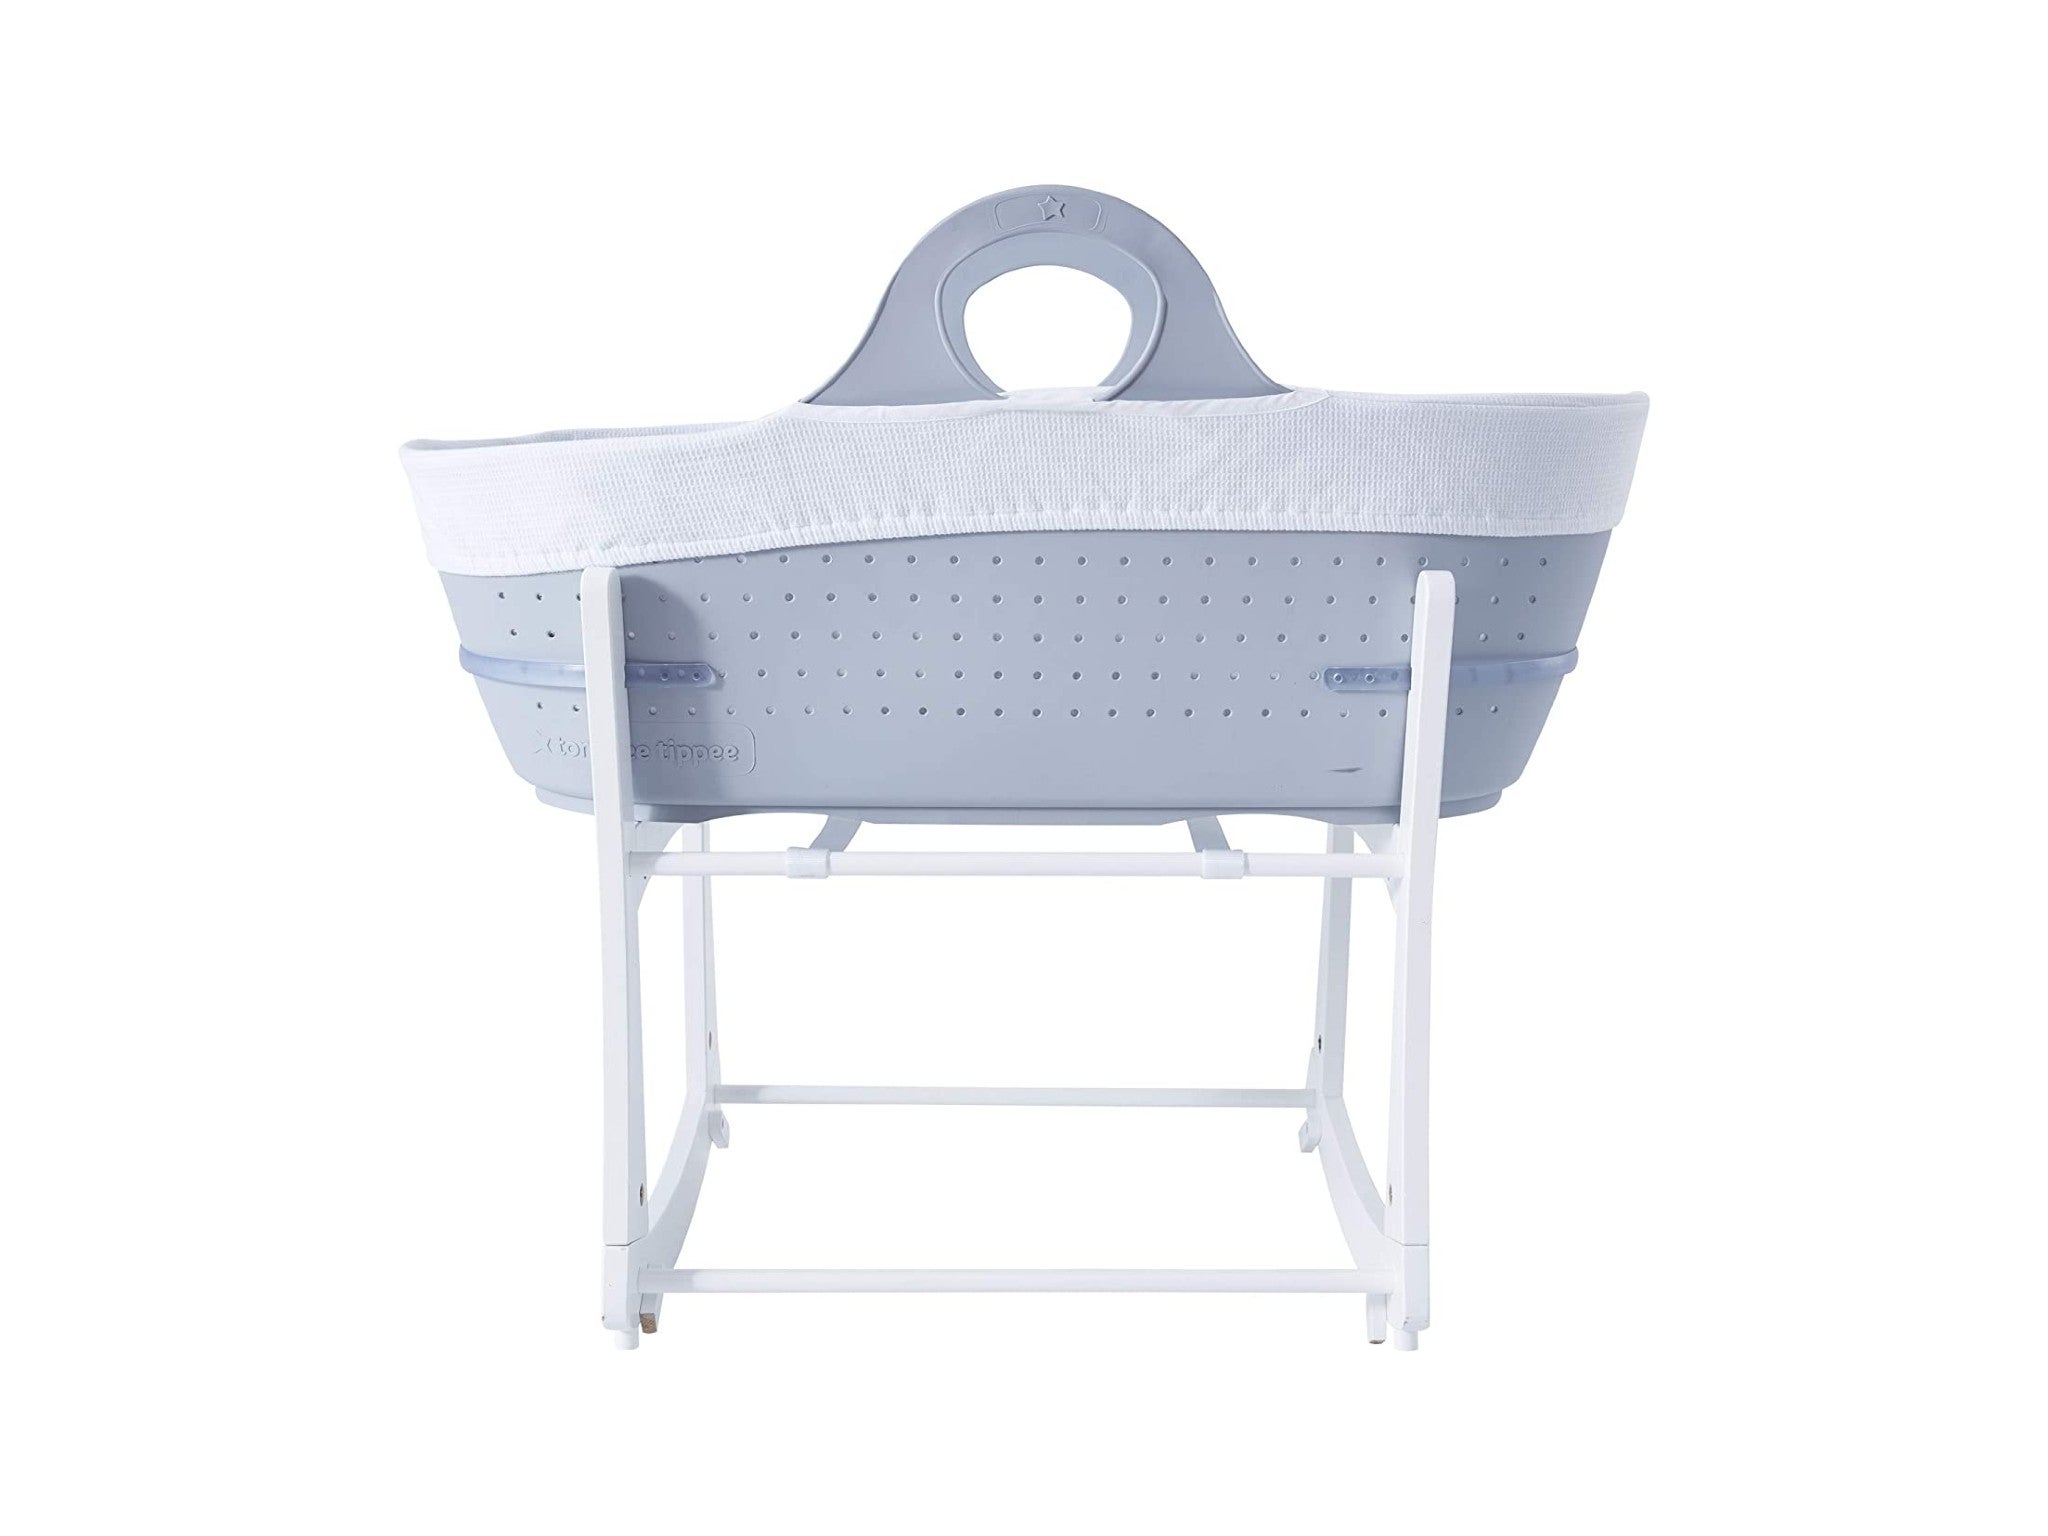 Tommee Tippee sleepee Moses basket with stand indybest.jpg